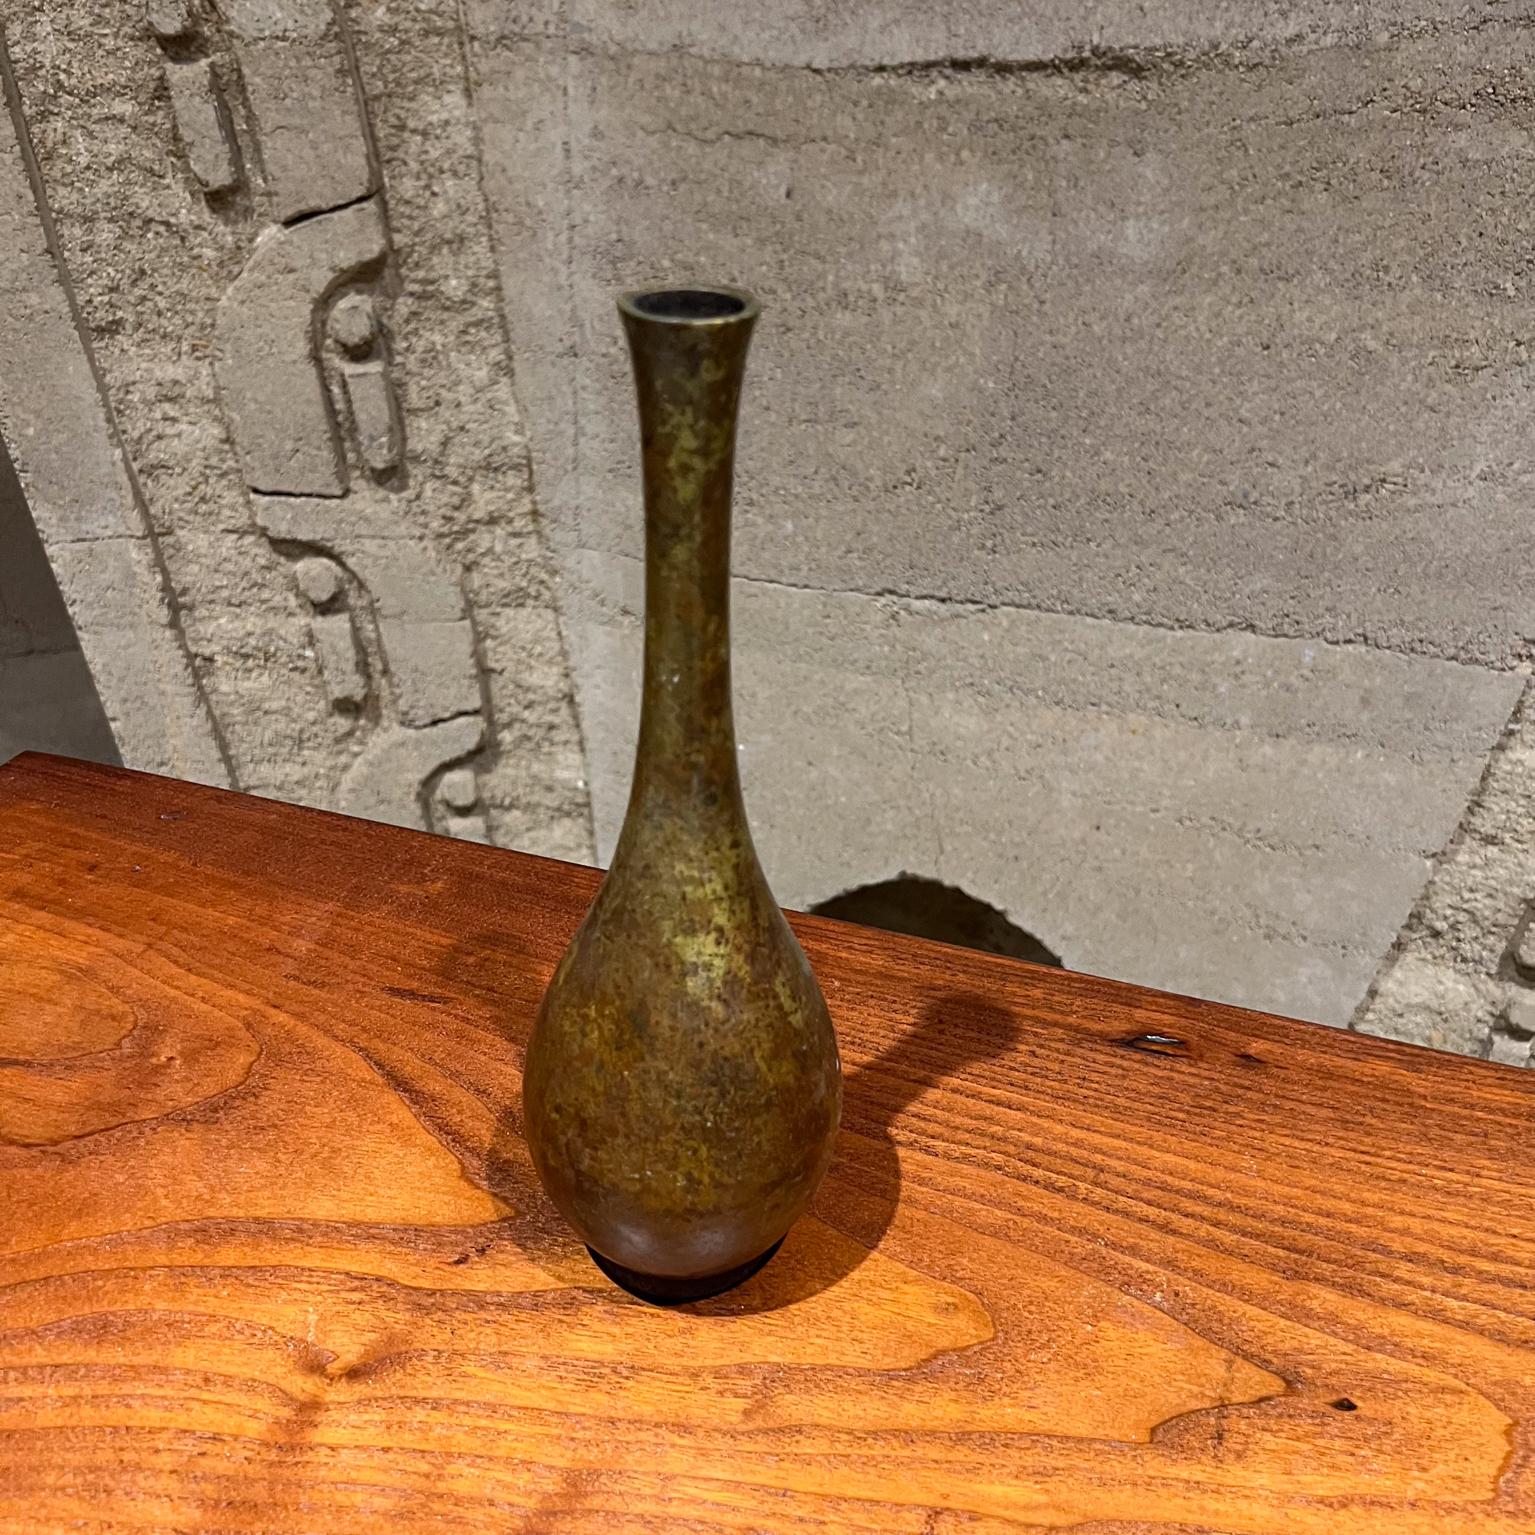 Sculptural Japanese Bronze Vase Teardrop Bottle
Patinated metal iron and gilt
10.13 h x 3.25 diameter
Original preowned vintage unrestored
See all images provided.